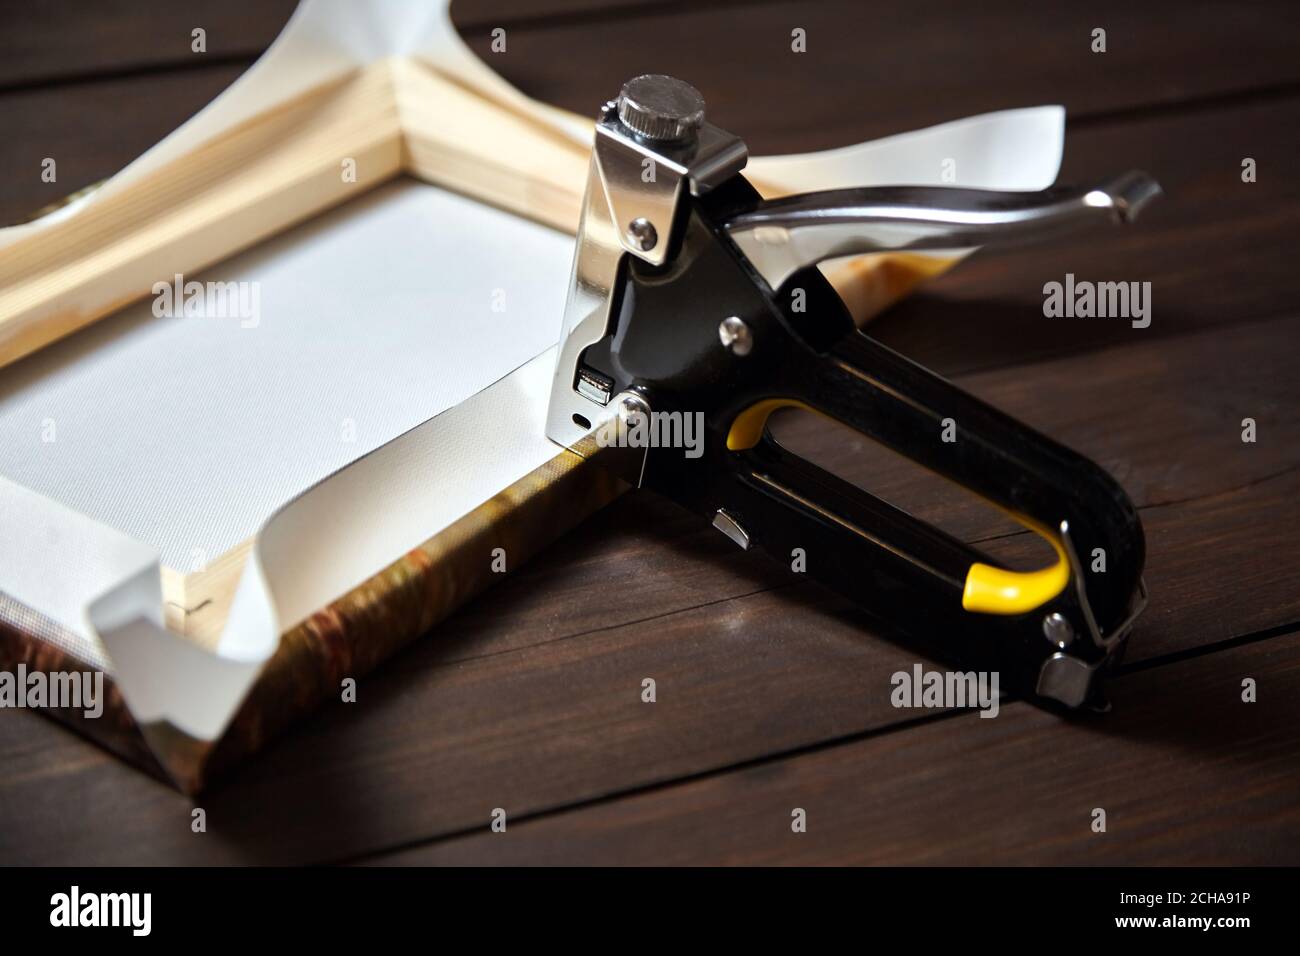 Fastening fabric and board using construction stapler on bright background  Stock Photo by ©belchonock 40884417